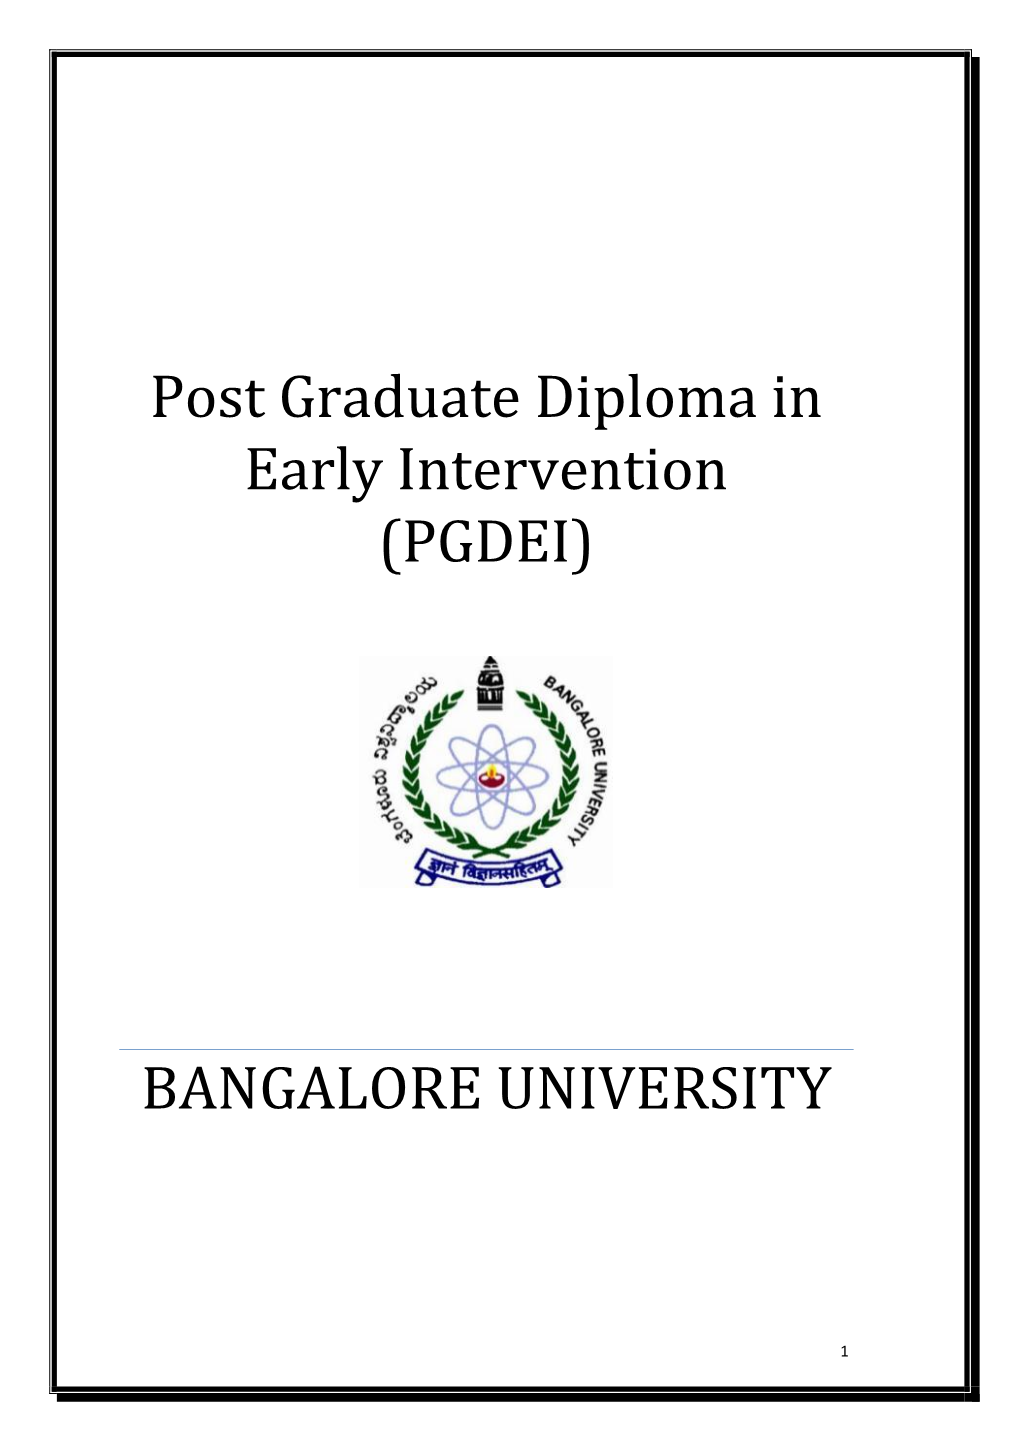 Post Graduate Diploma in Early Intervention (PGDEI)